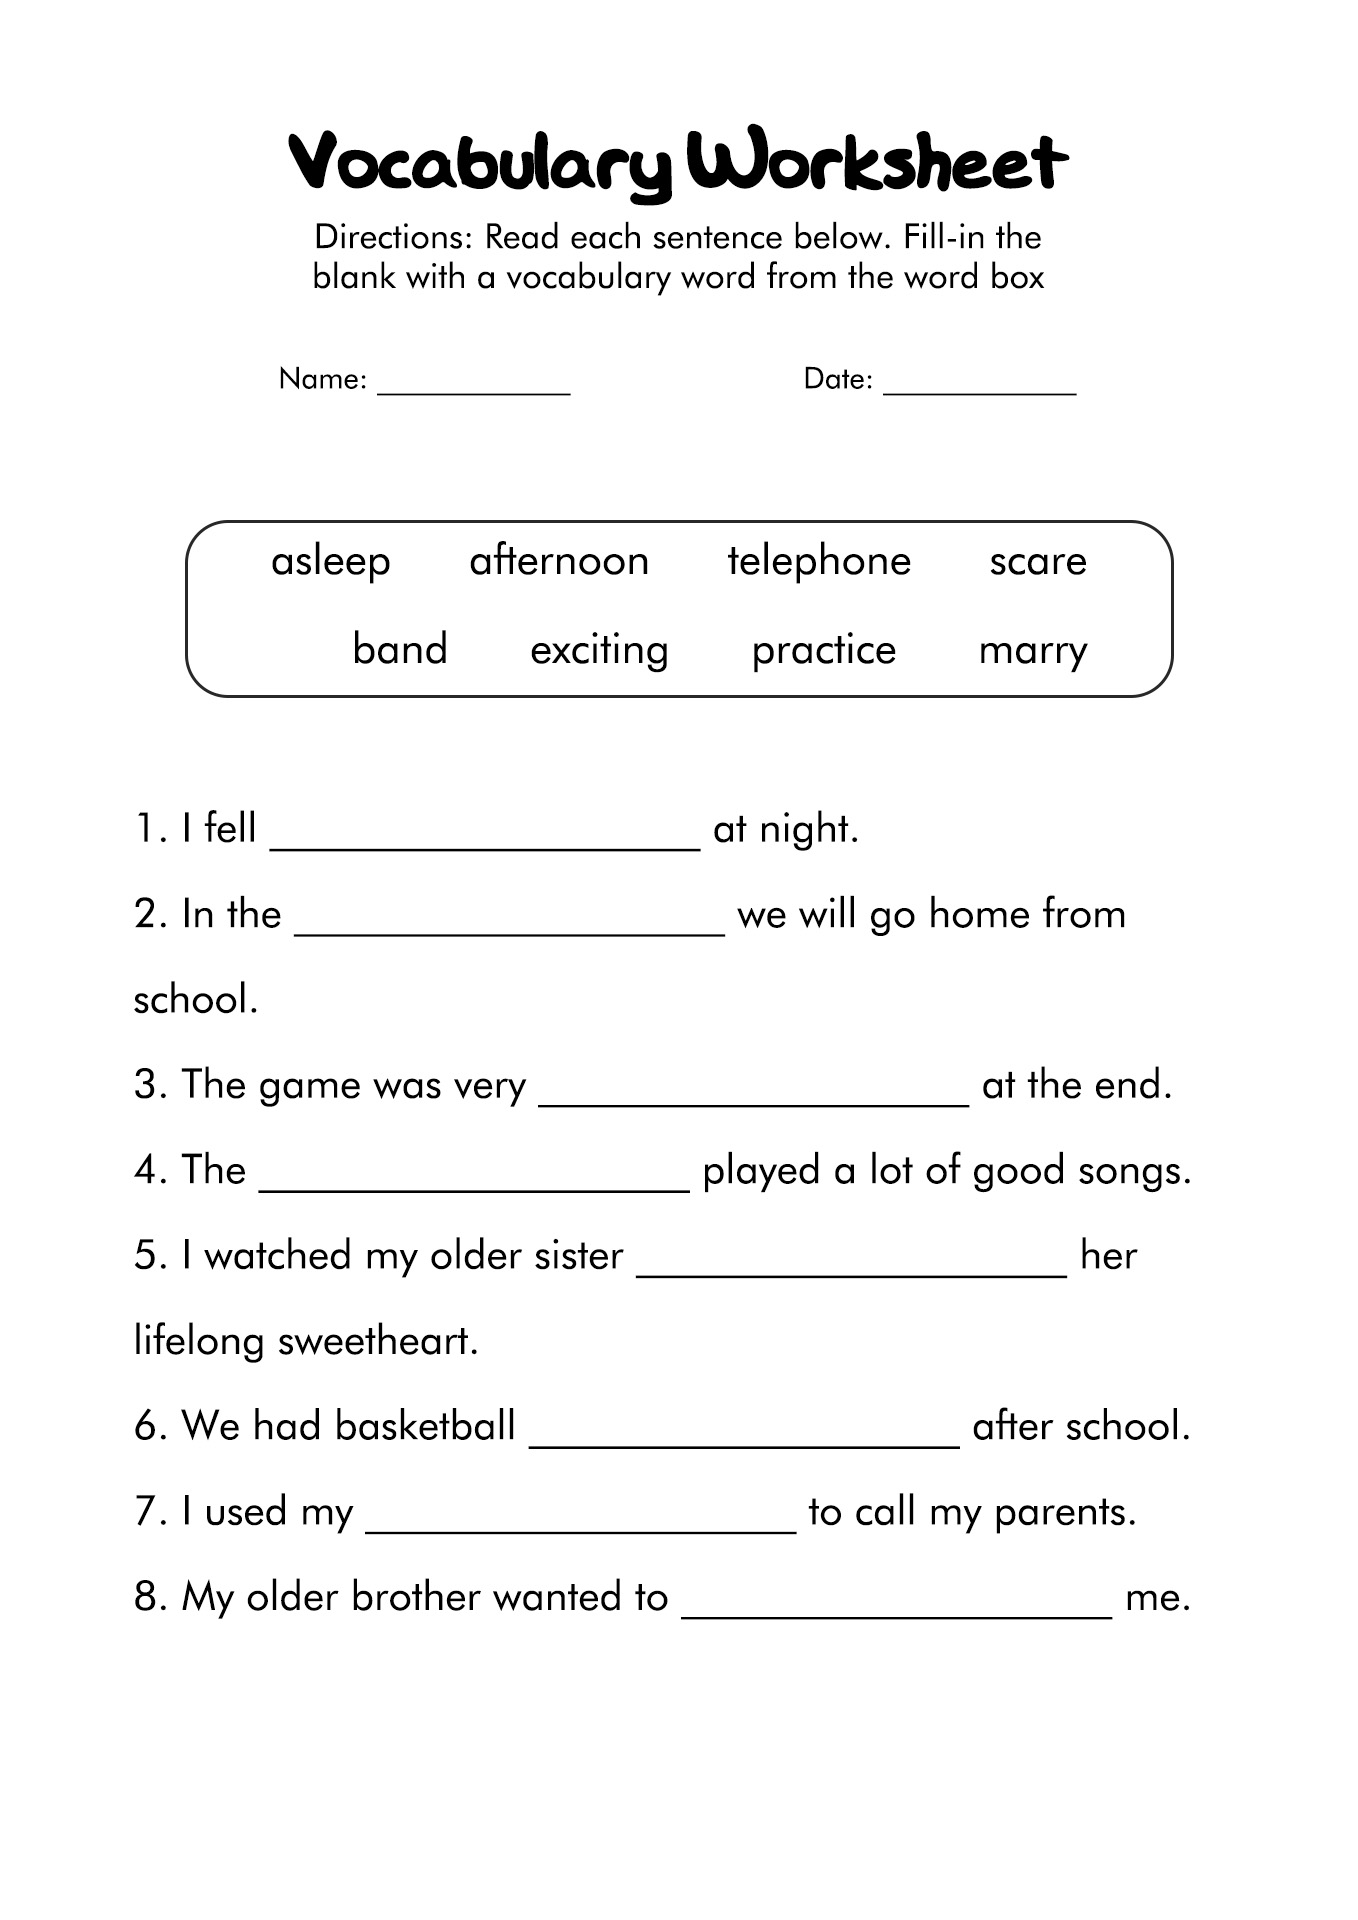 17-best-images-of-7th-grade-vocabulary-worksheets-7th-grade-vocabulary-word-lists-7th-grade